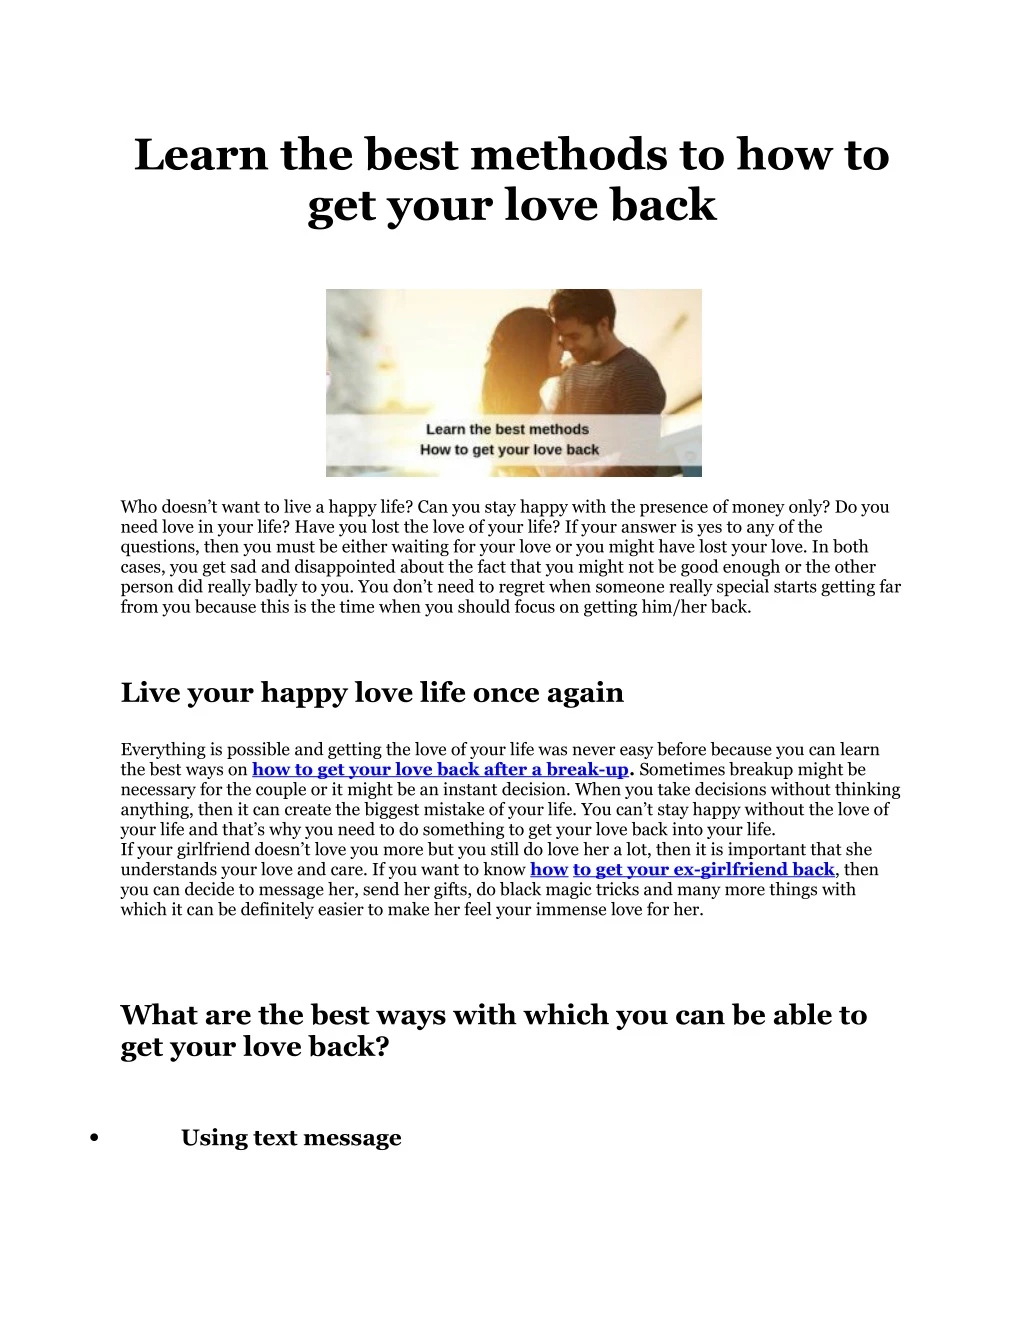 learn the best methods to how to get your love